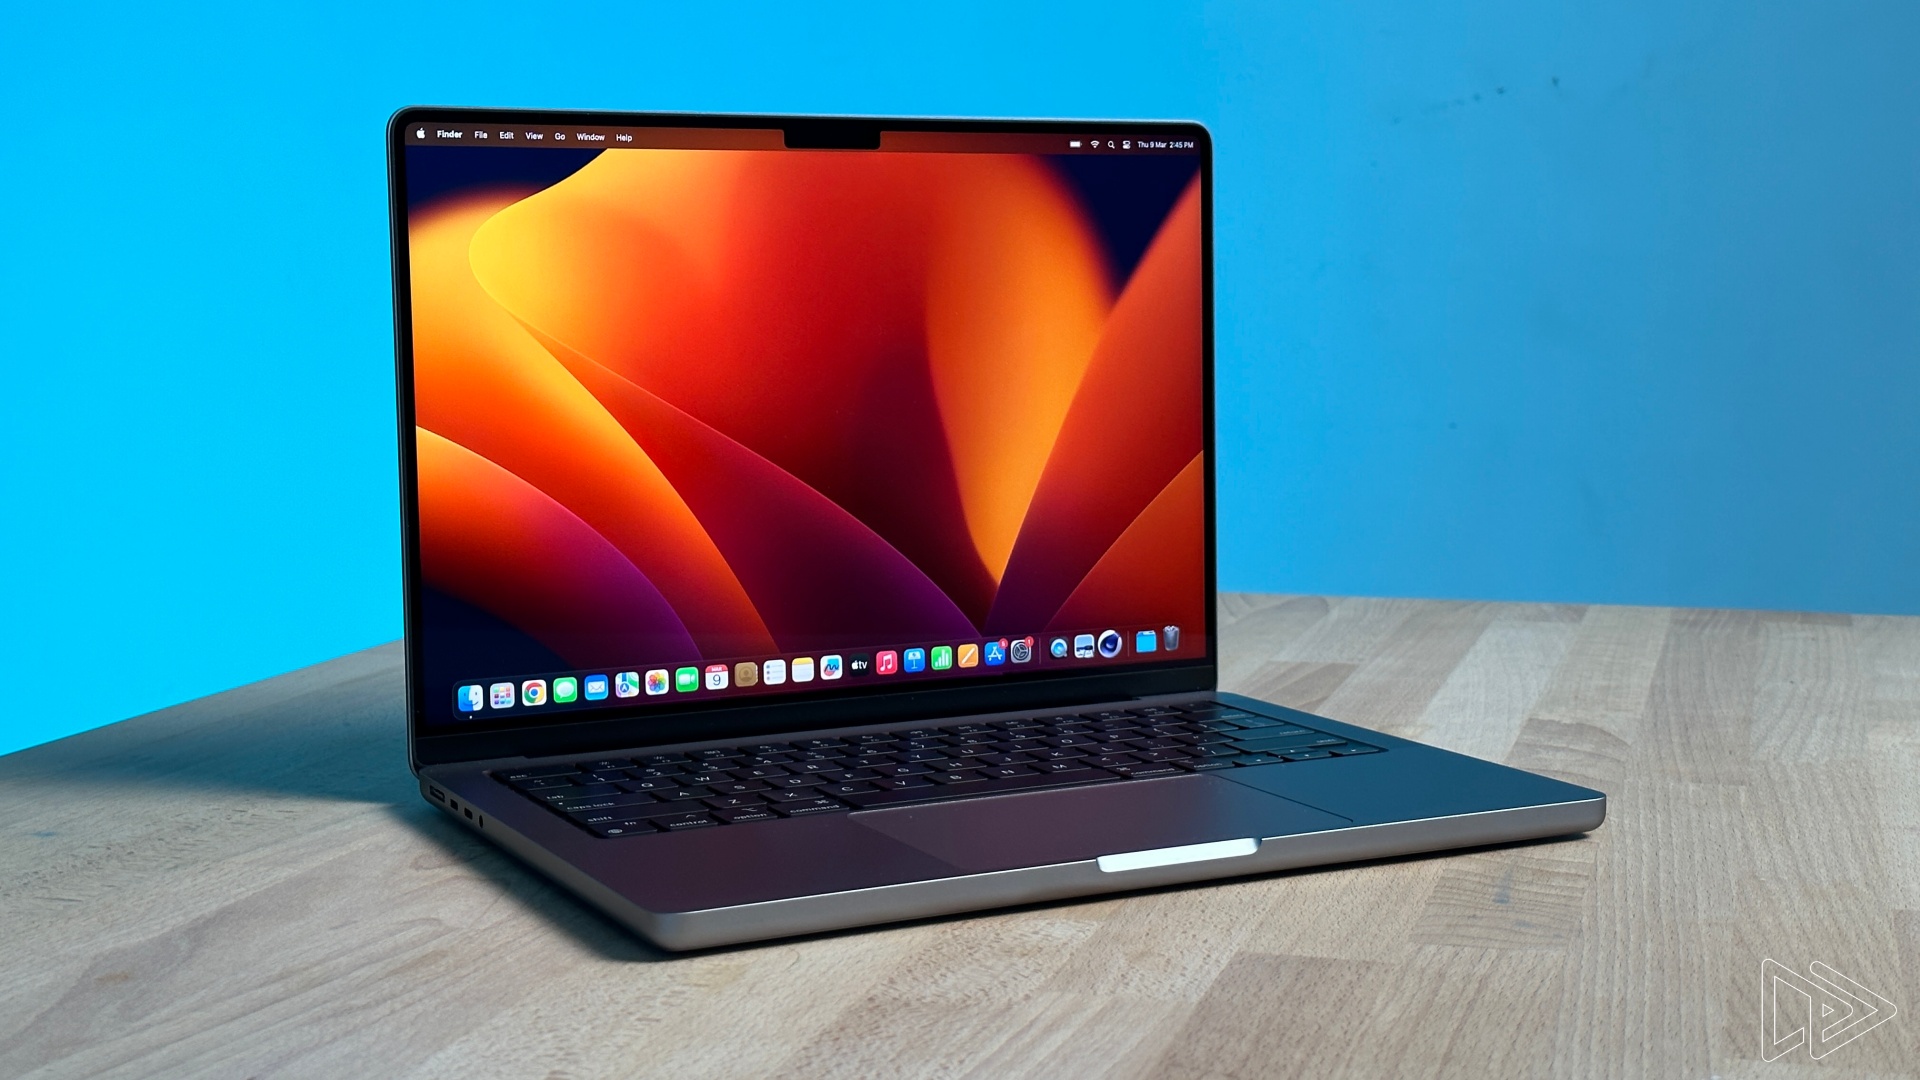 new apple macbooks coming at wwdc - an image of the new 2023 macbook pro against a blue background